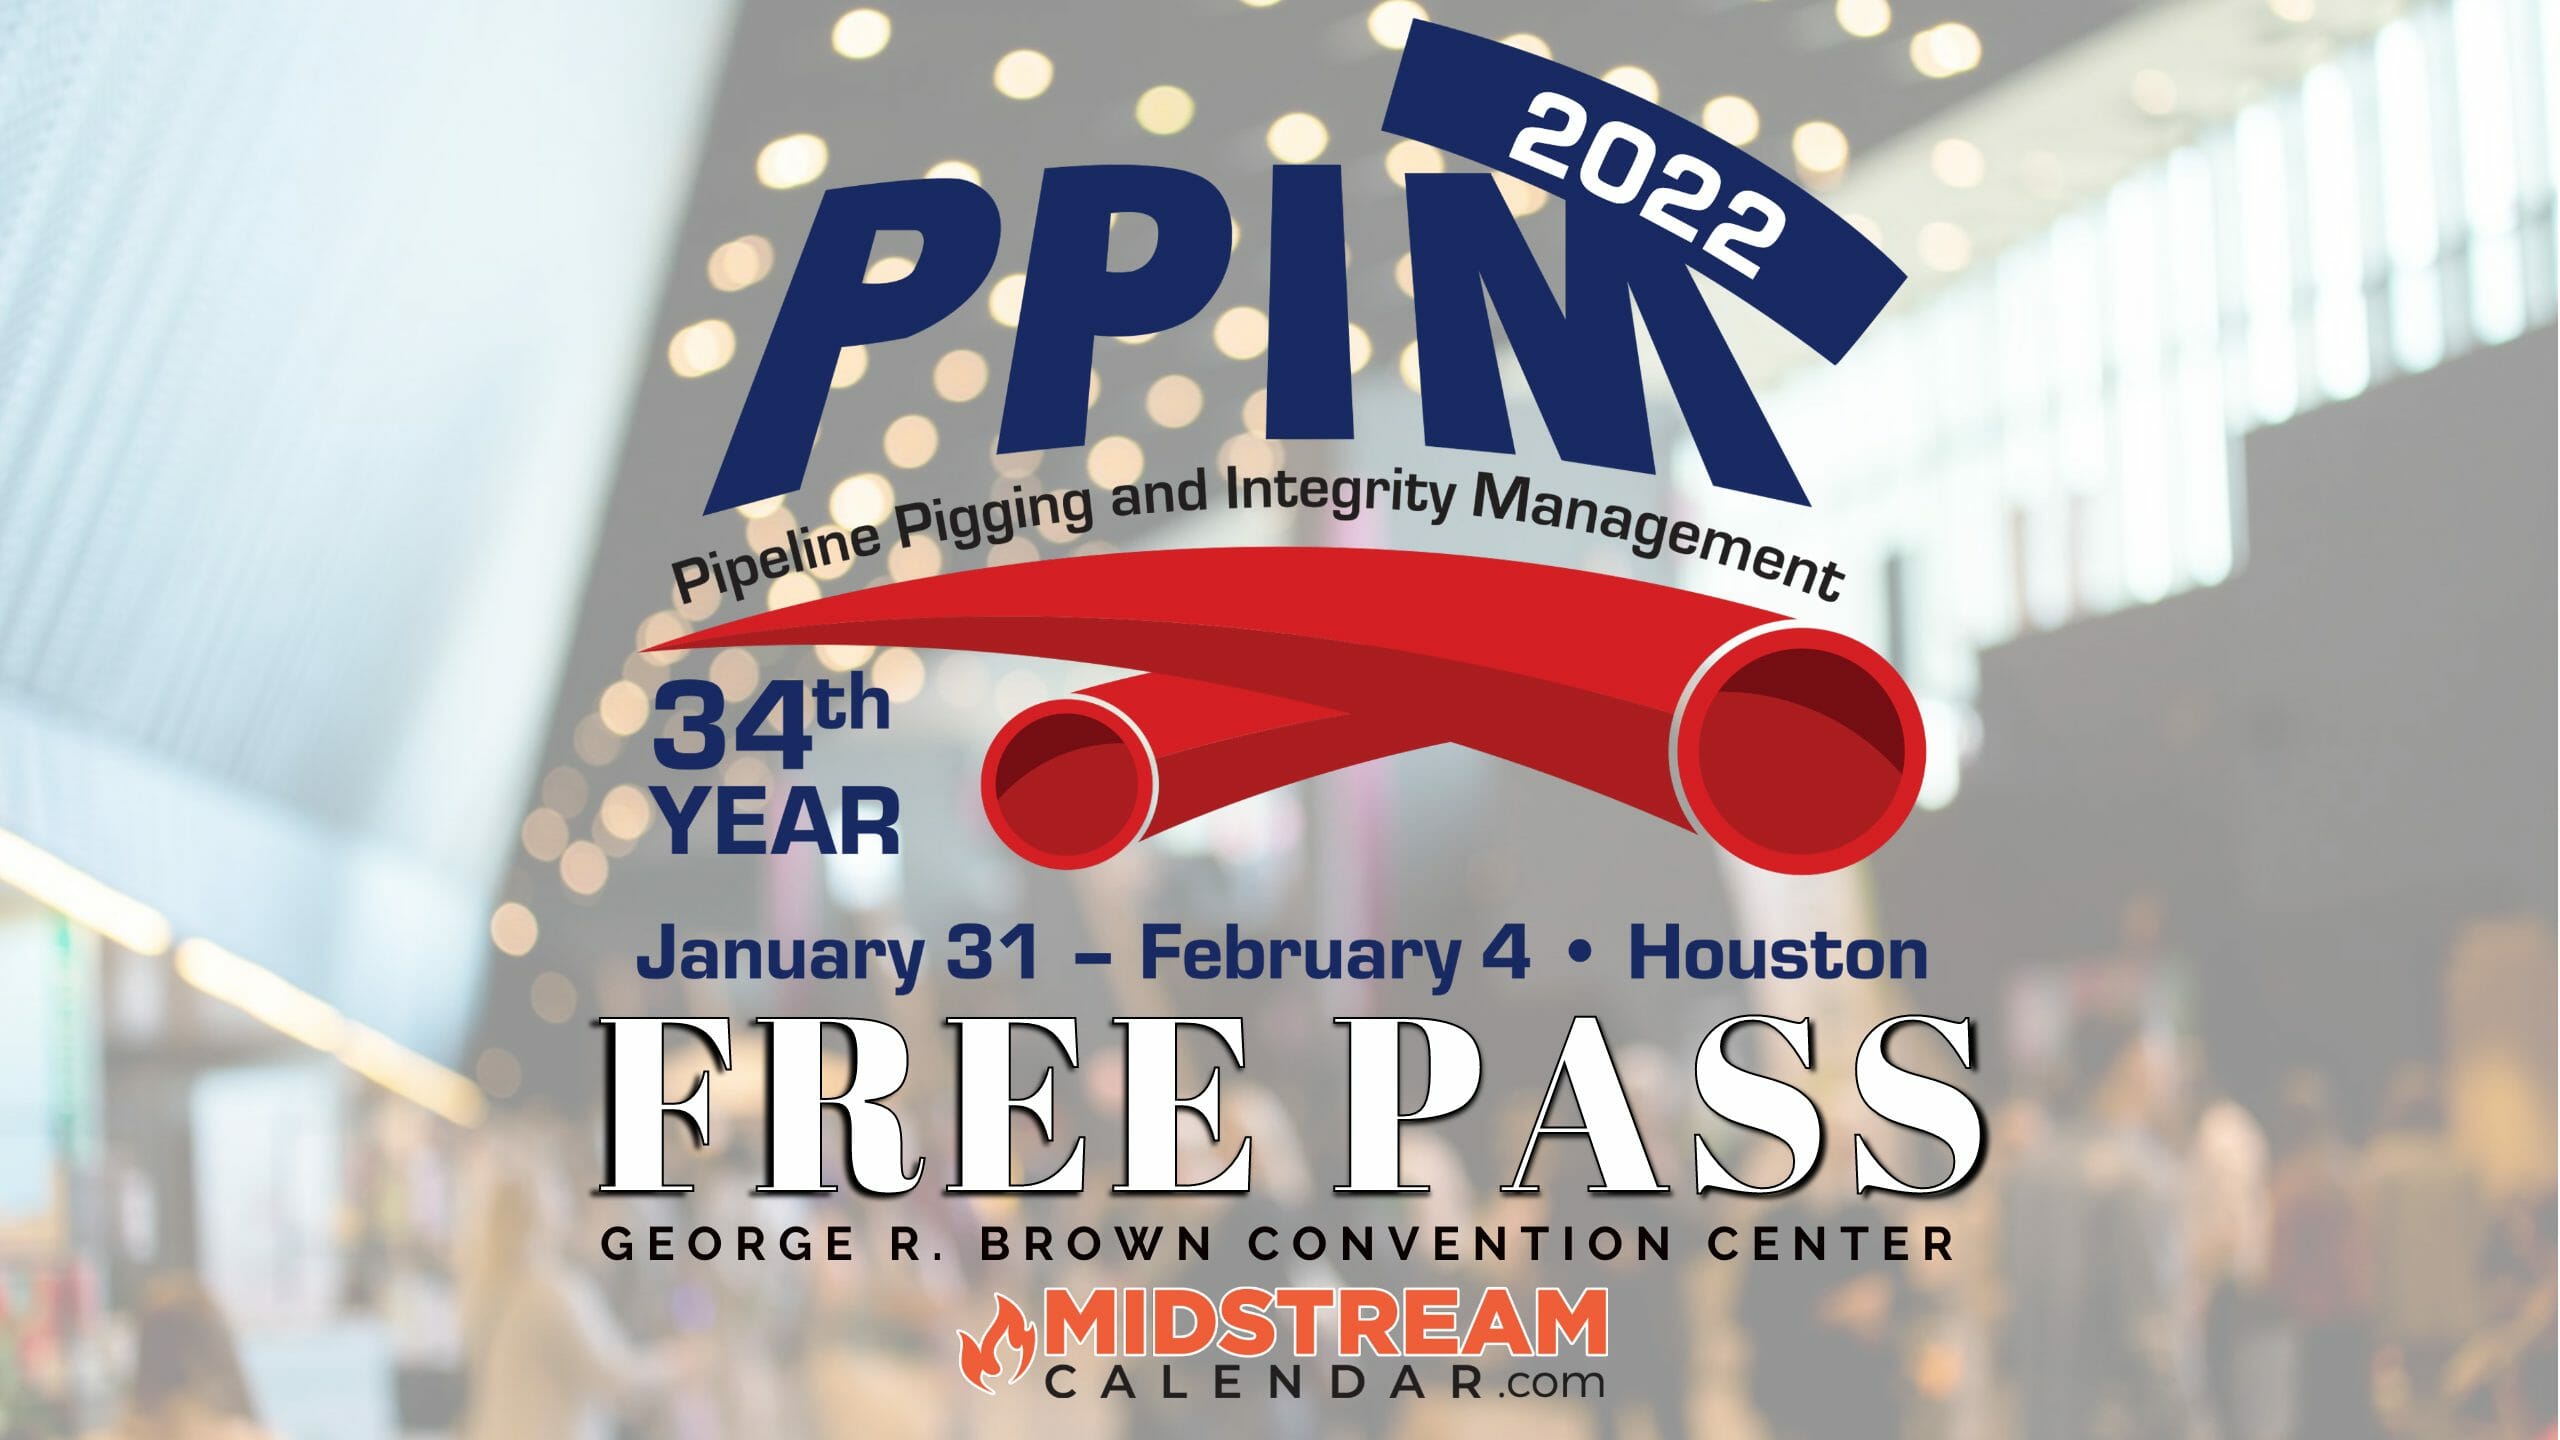 Midstream Calendar Events Houston Pipeline Pigging and Integrity Management Show Houston Sponsored by JP Services